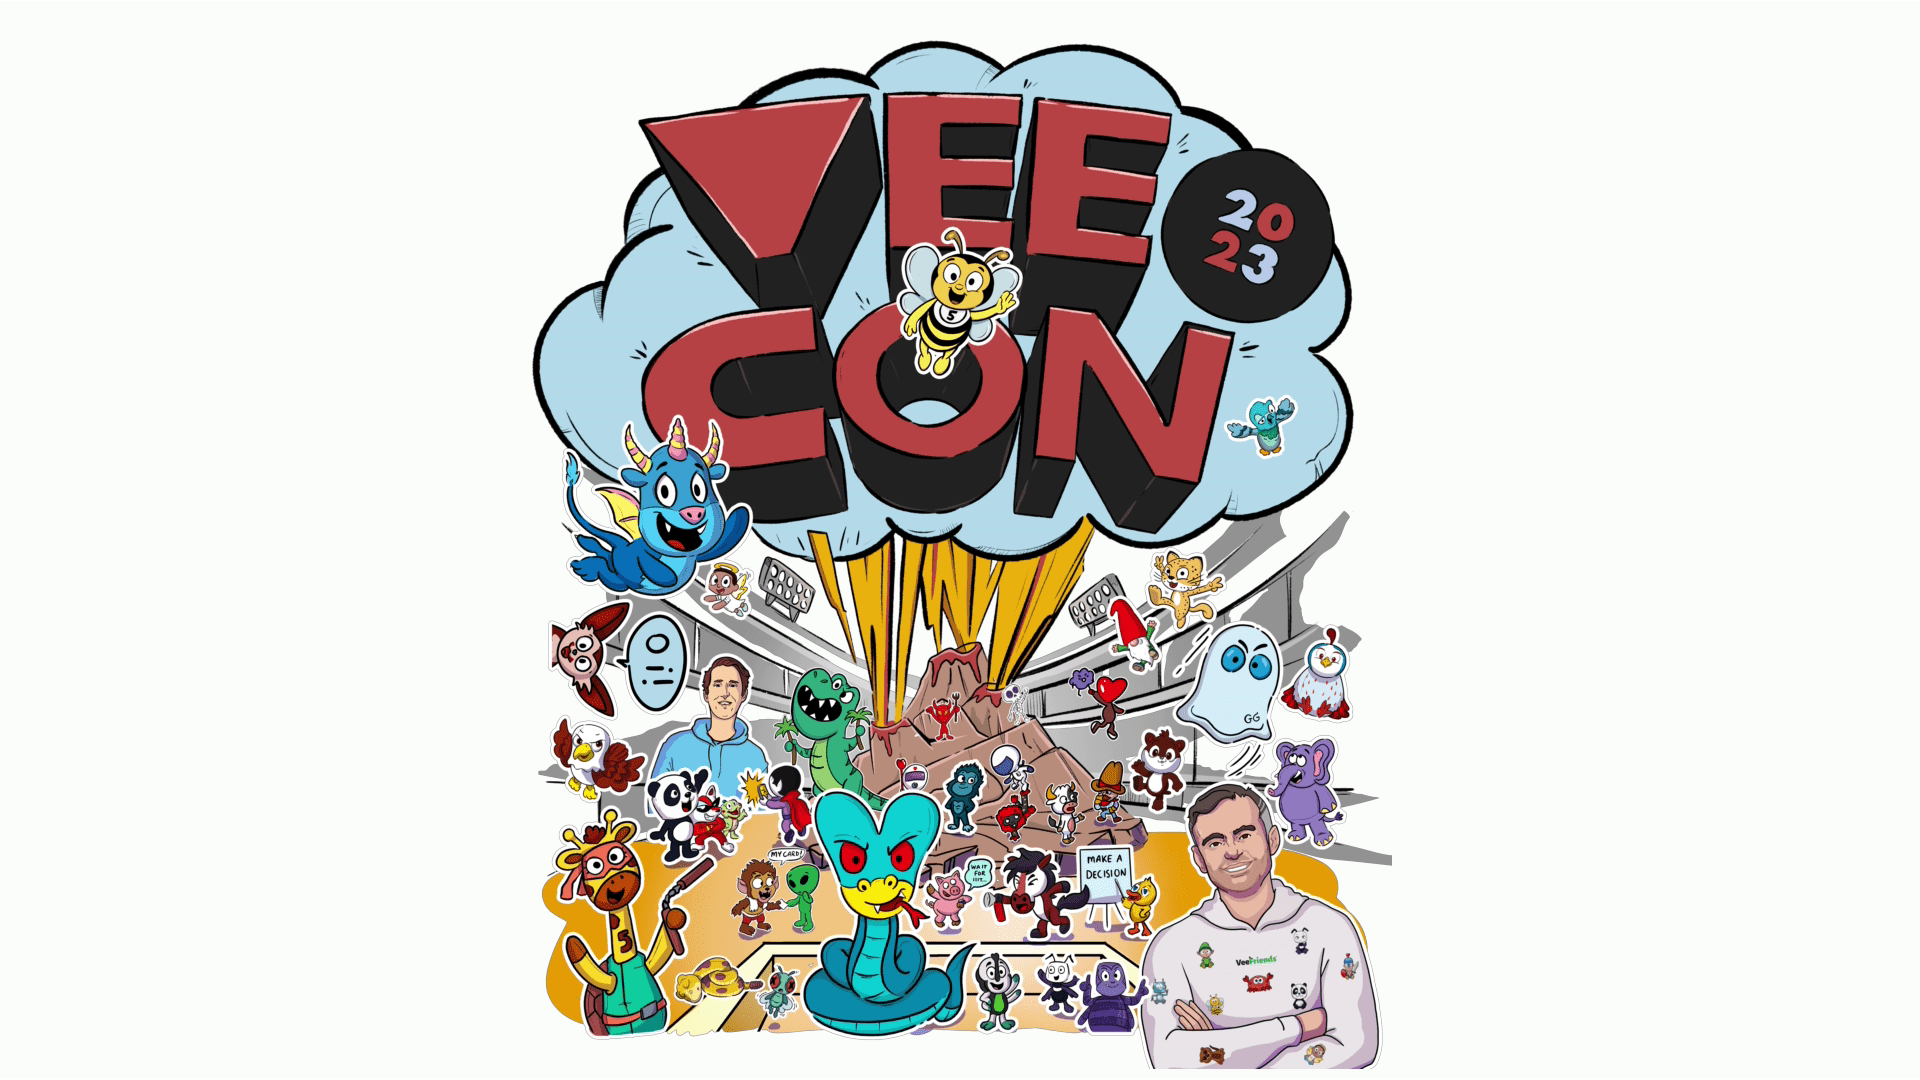 VEECON 2023: GARY VAYNERCHUK’S SUPER CONFERENCE WHICH CONVERGES POP CULTURE AND BUSINESS HEADS TO INDIANAPOLIS